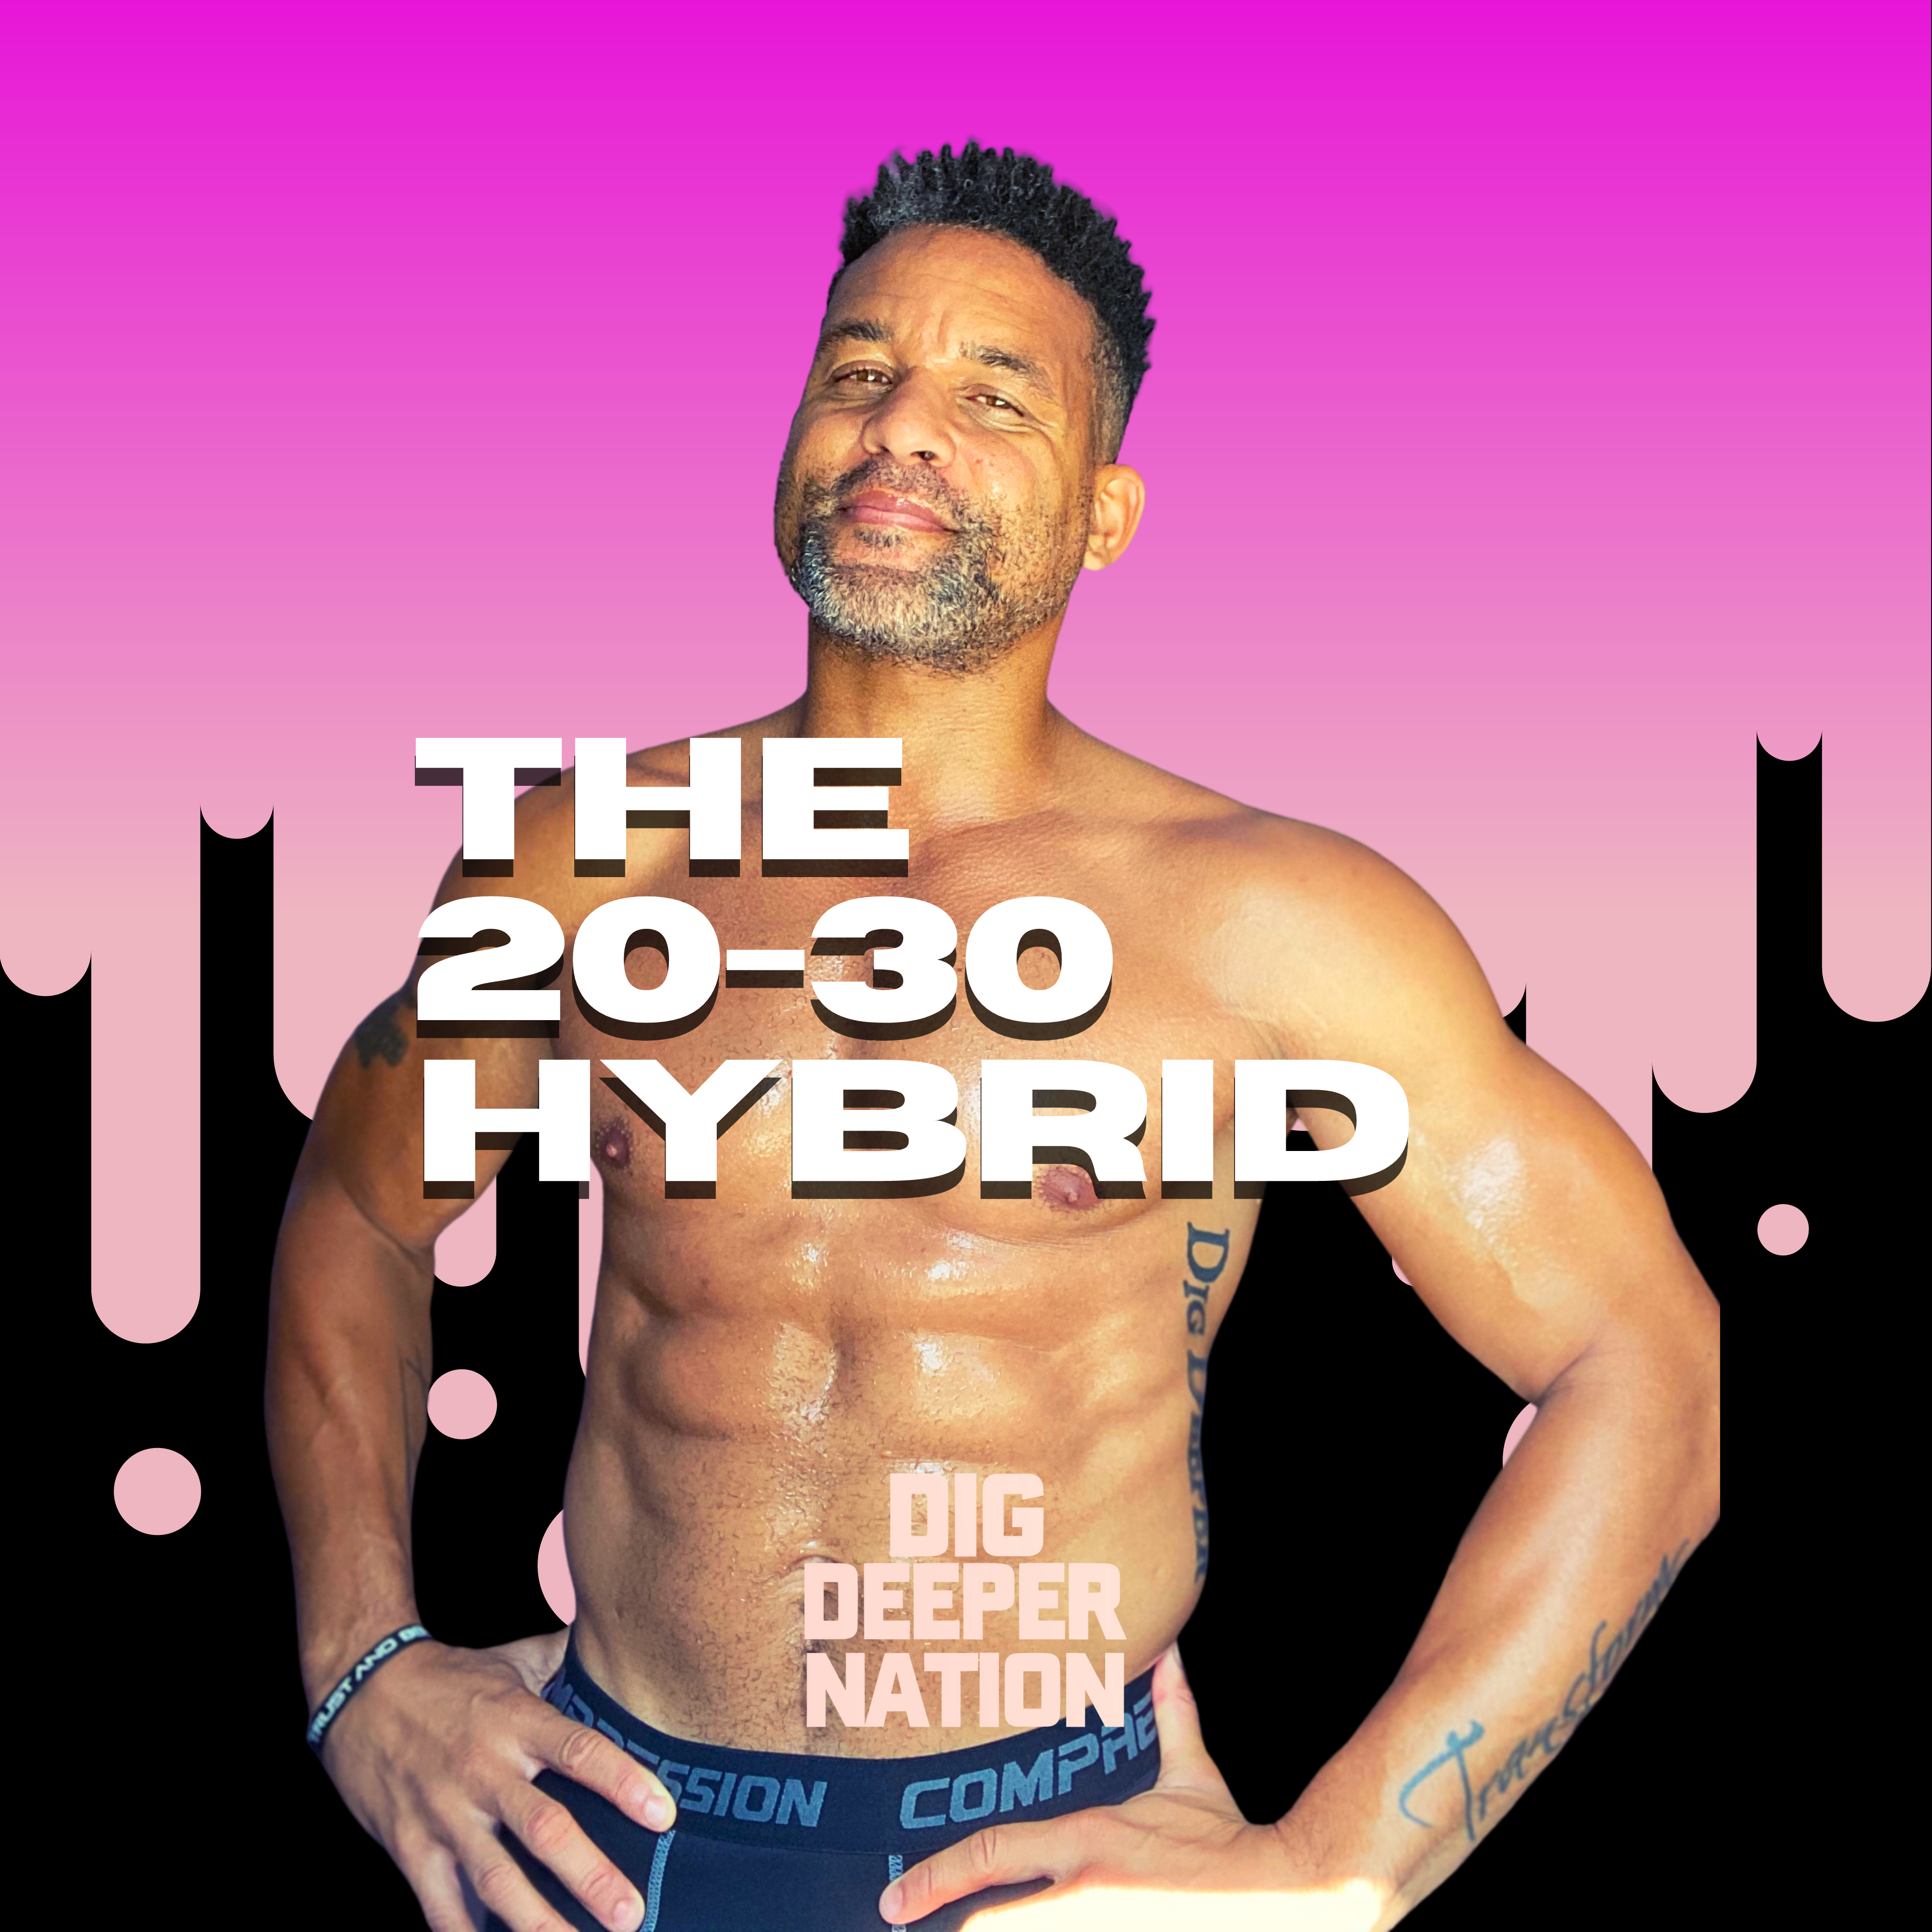 Black background with purple paint dripping, Shaun T in foreground with text reading "the 20-30 Hybrid Calendar"